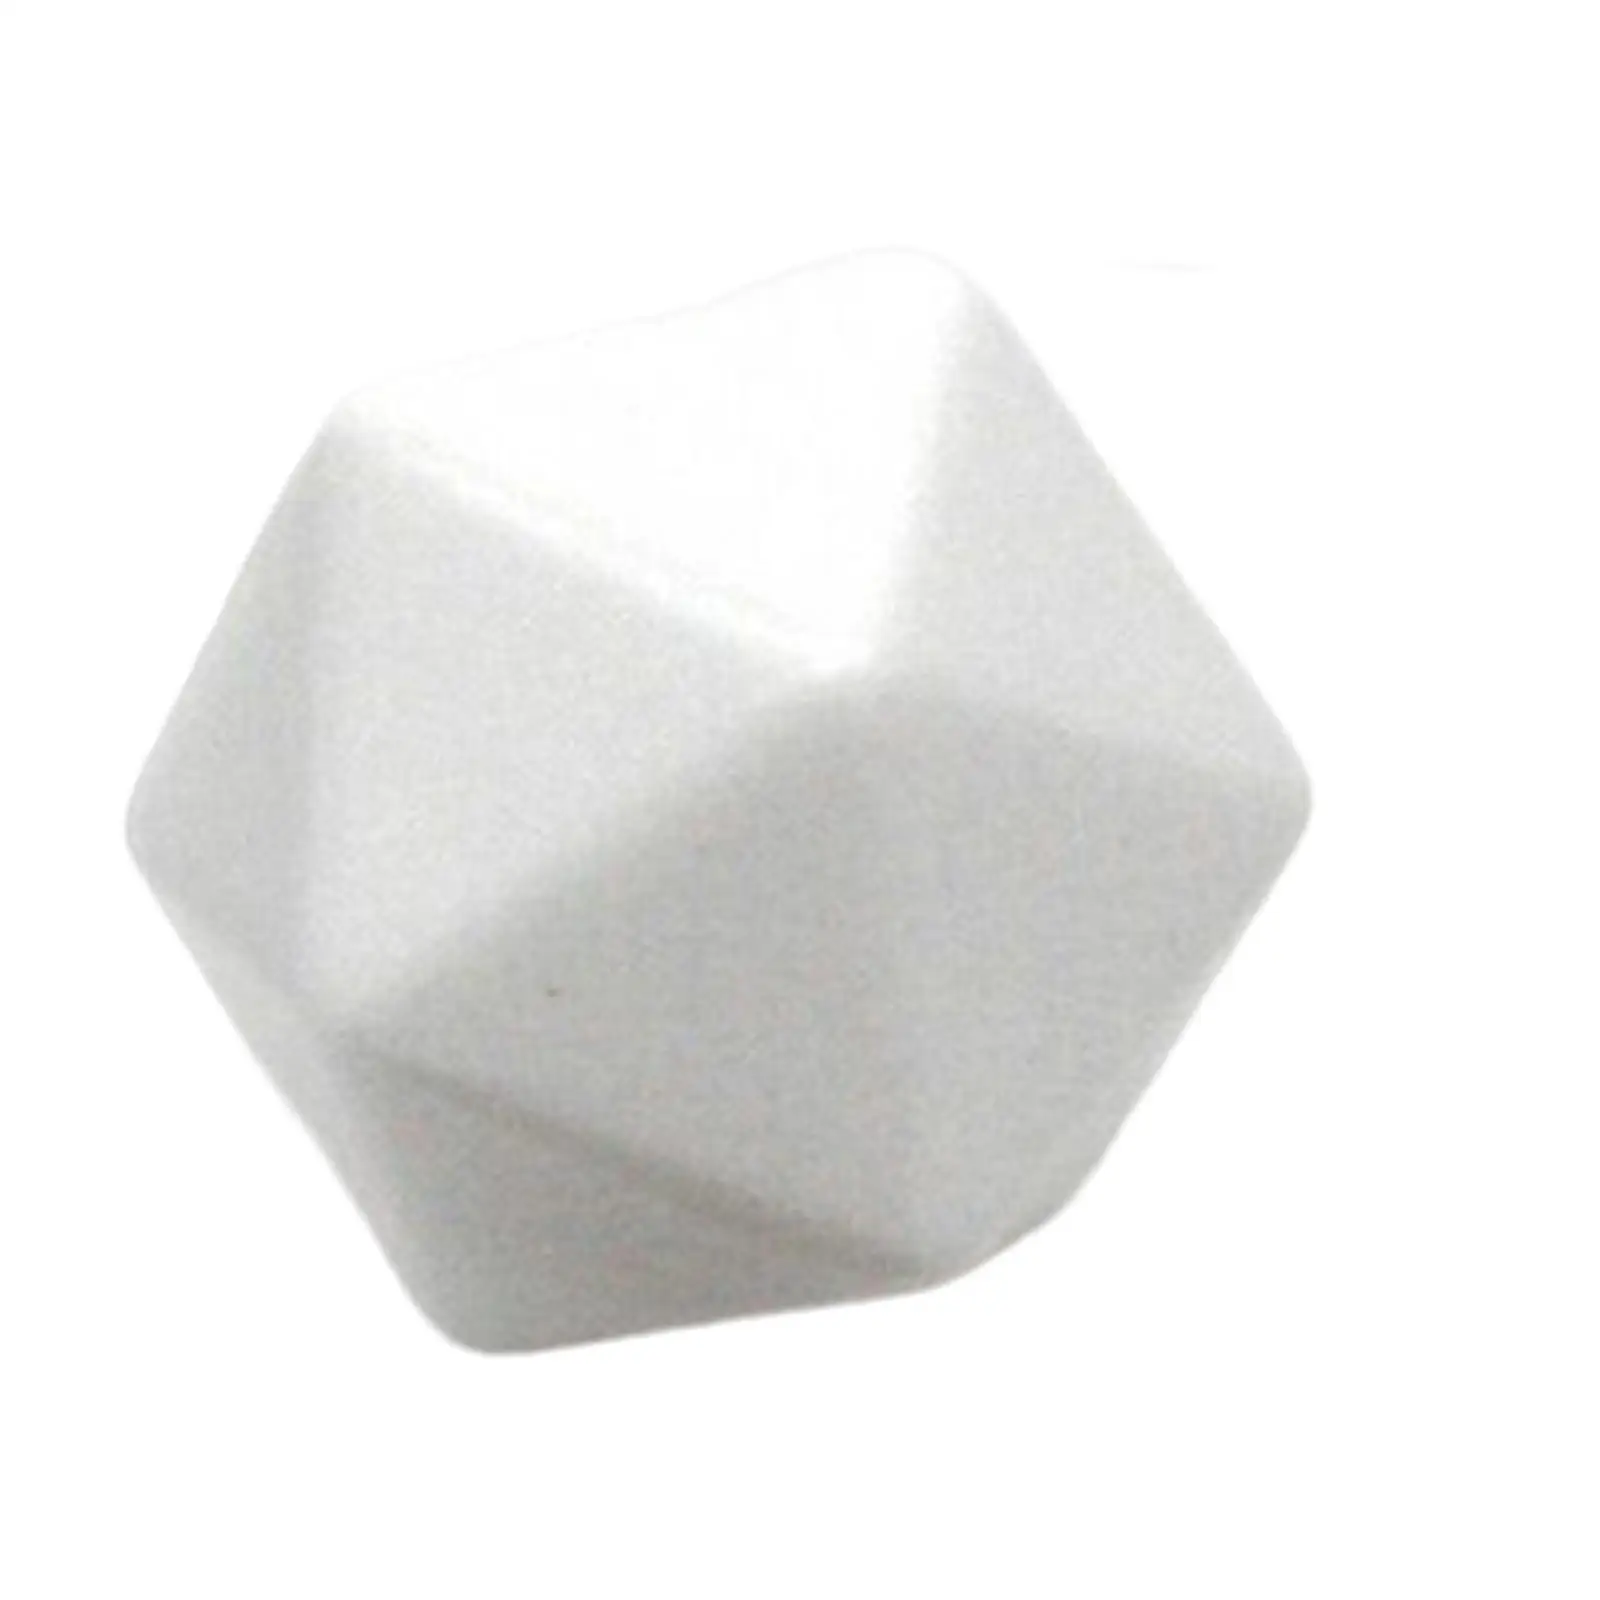 Acrylic Blank Polyhedral Dices Game Dices for Party Supplies, Board Game, Math Counting Teaching, DIY Sticker, Puzzle